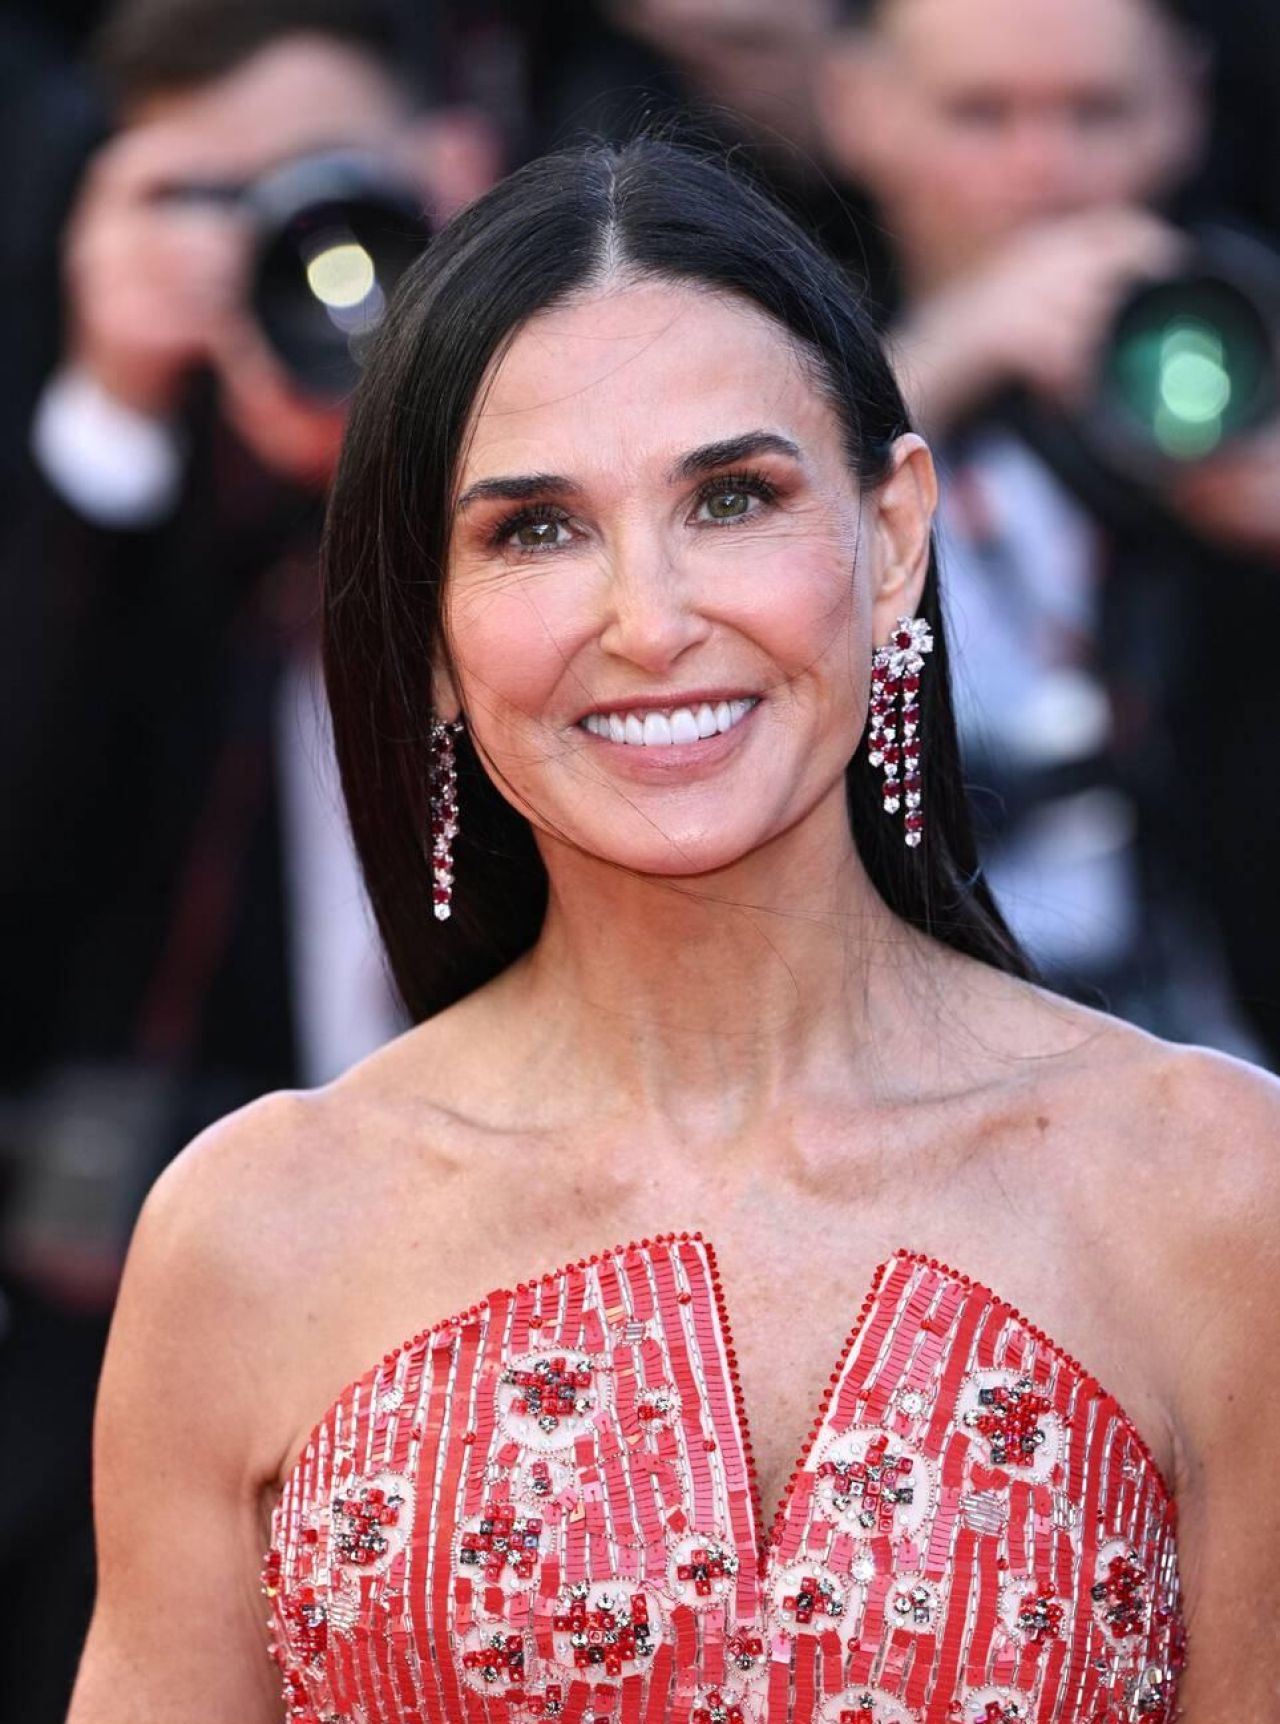 demi-moore-at-kinds-of-kindness-premiere-at-cannes-film-festival-14.jpg